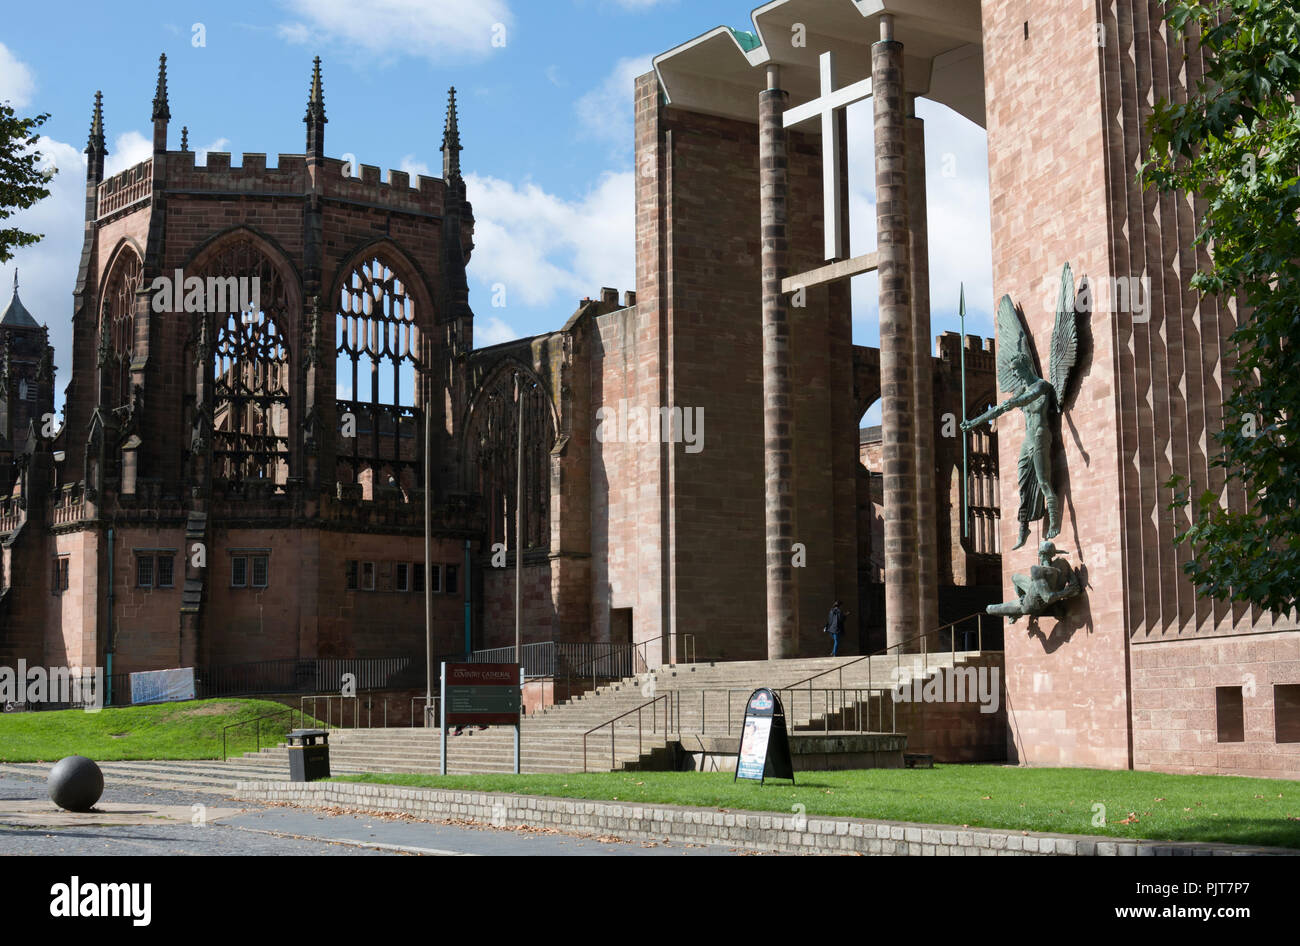 The old and new cathedrals, Coventry, England, UK Stock Photo